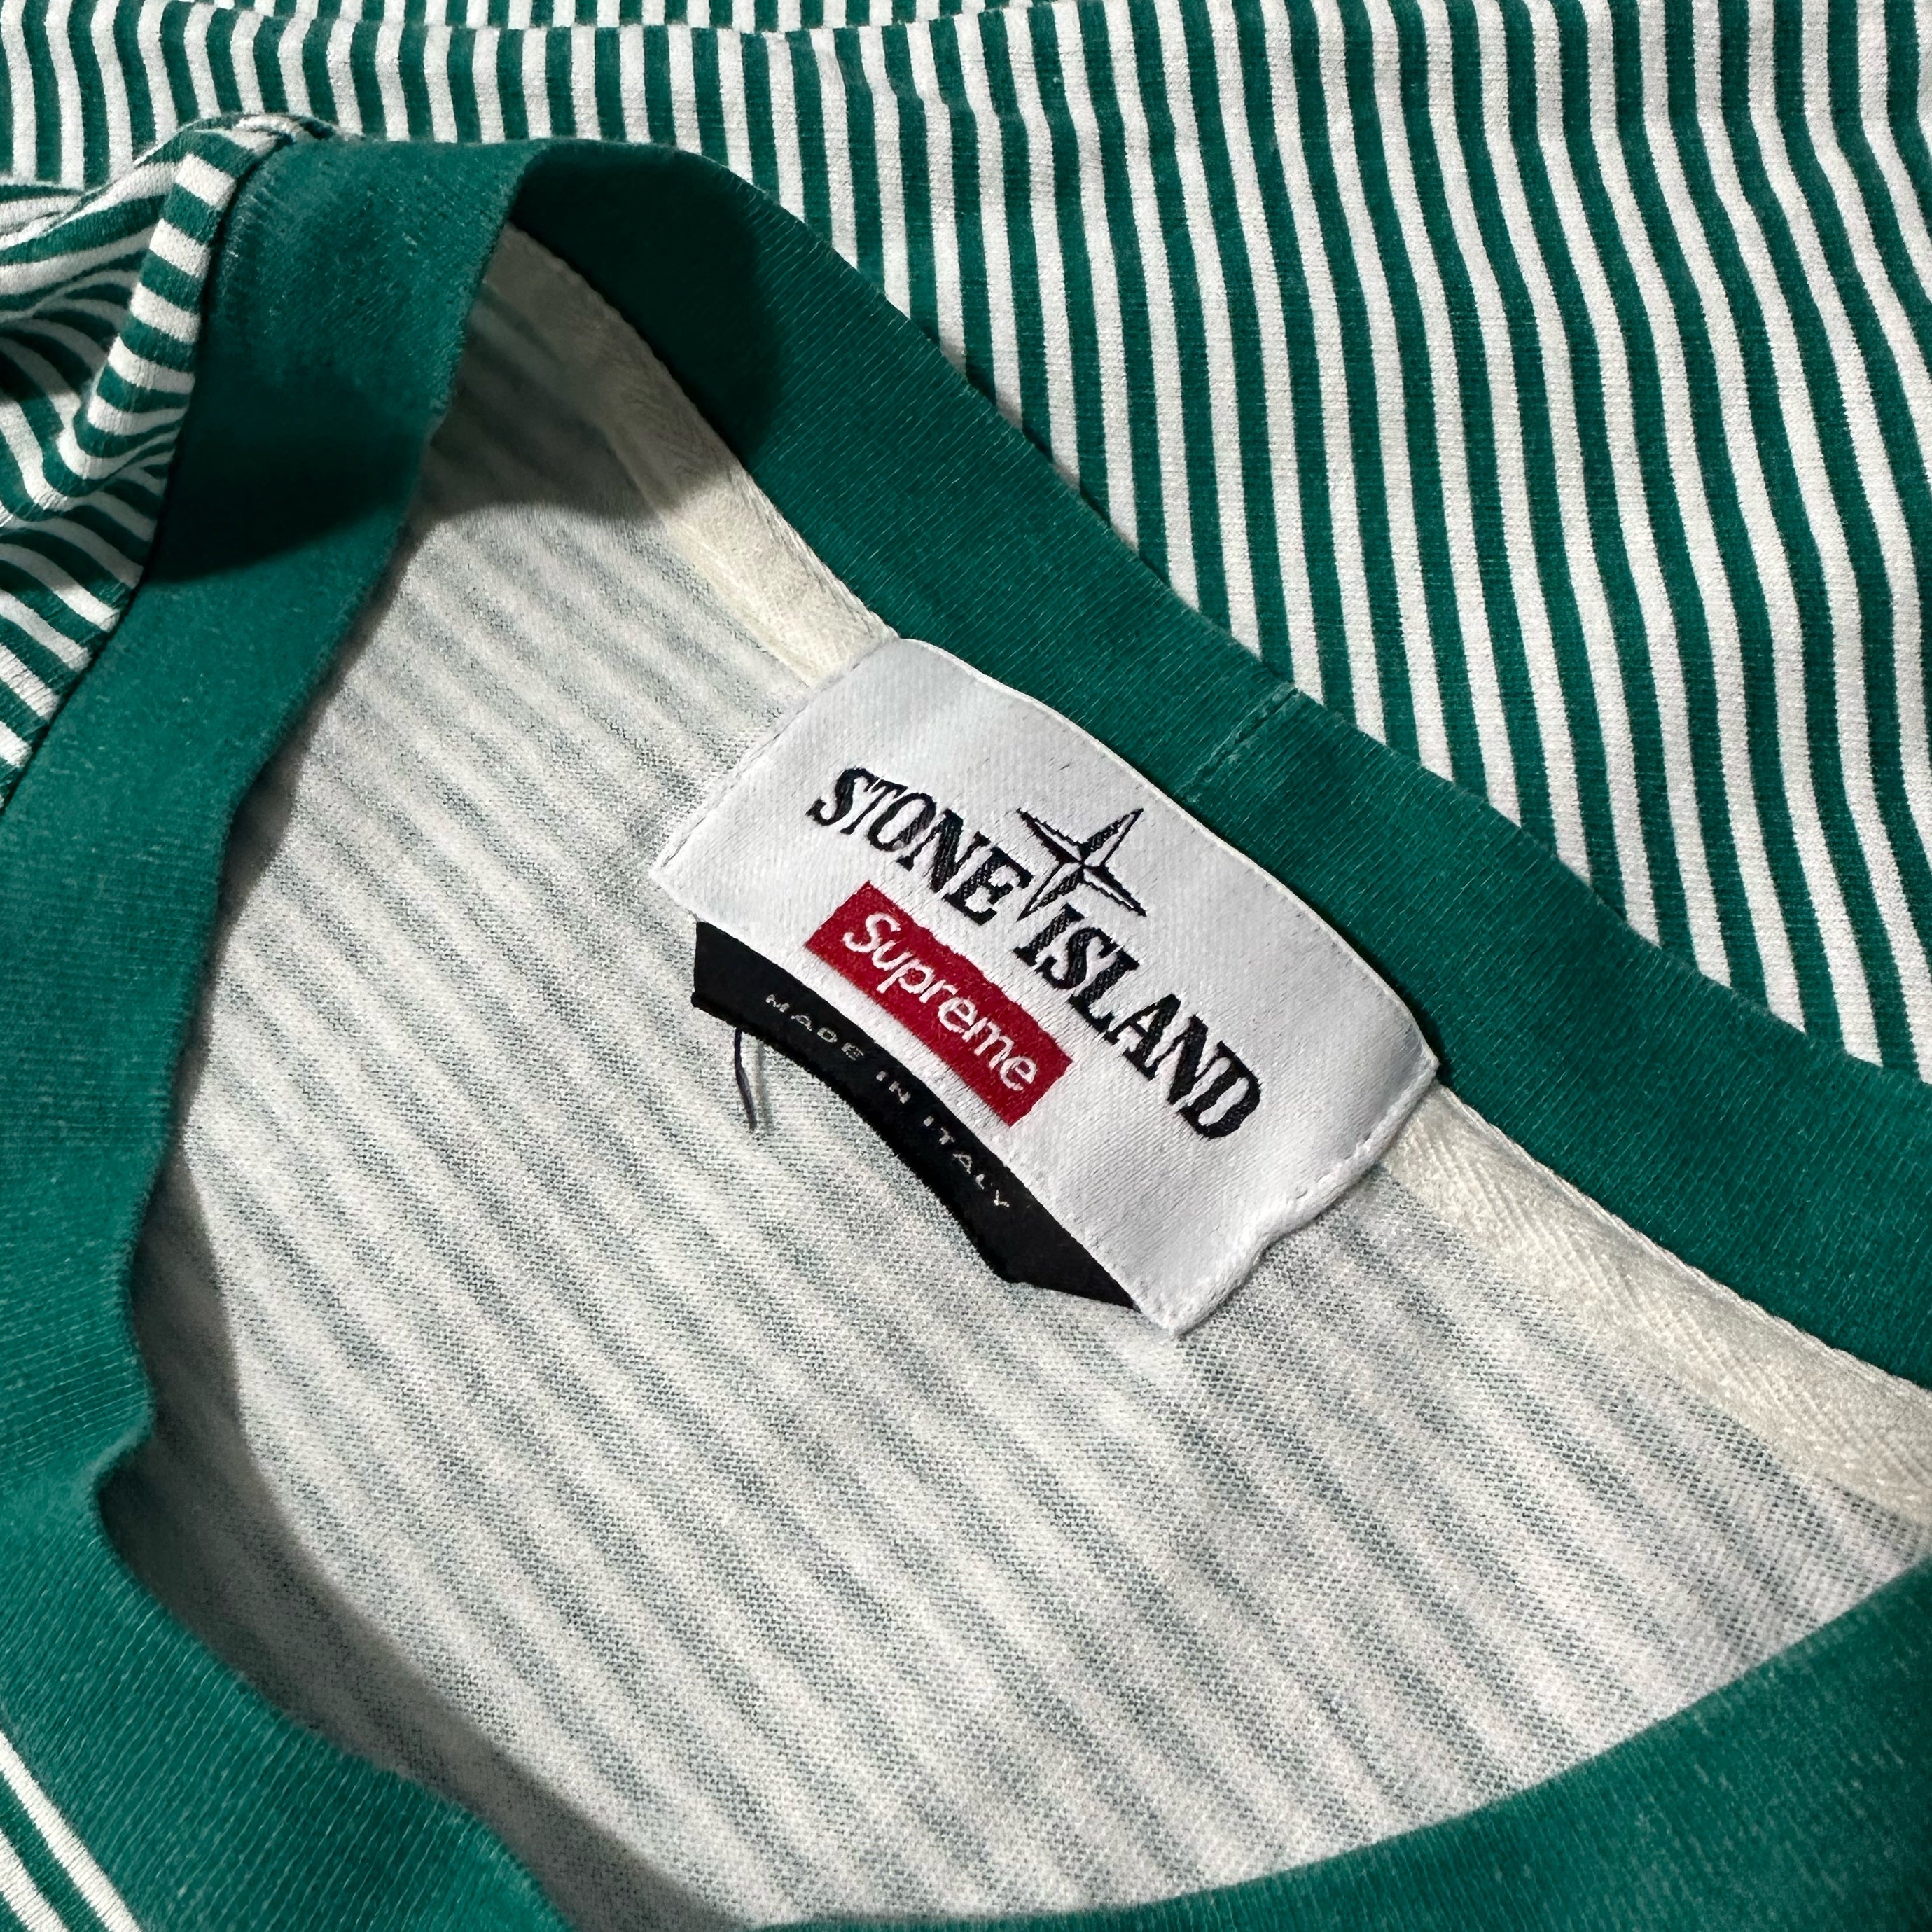 Stone Island x Supreme Striped Long Sleeved T Shirt with Spell Out Logo